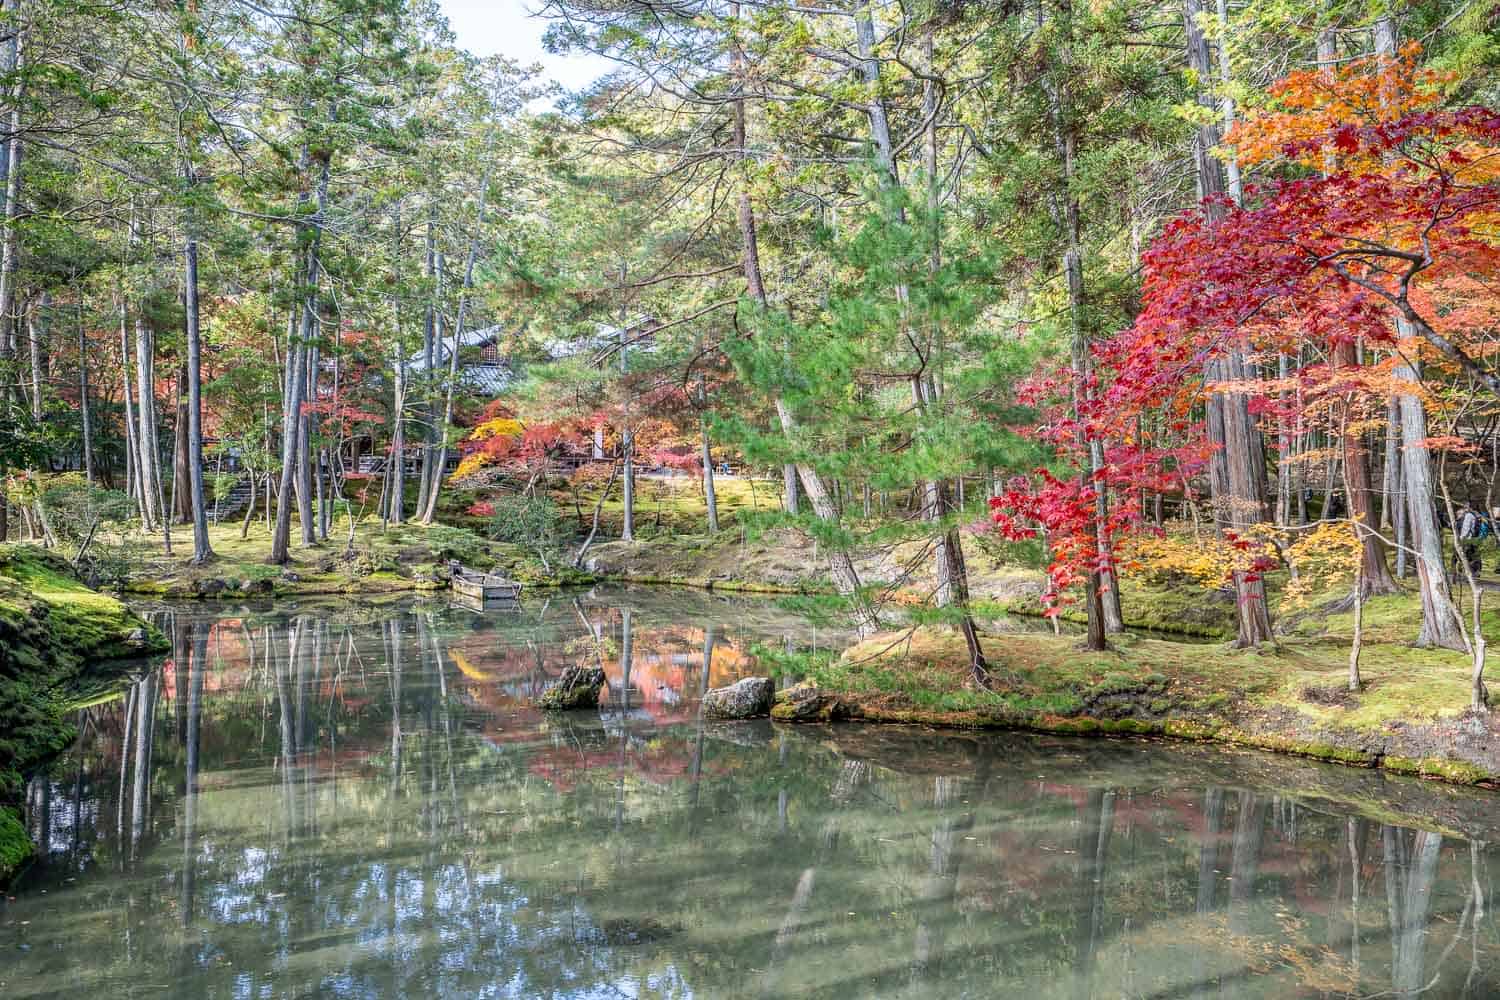 The golden pond at Moss Temple, Kyoto, Japan